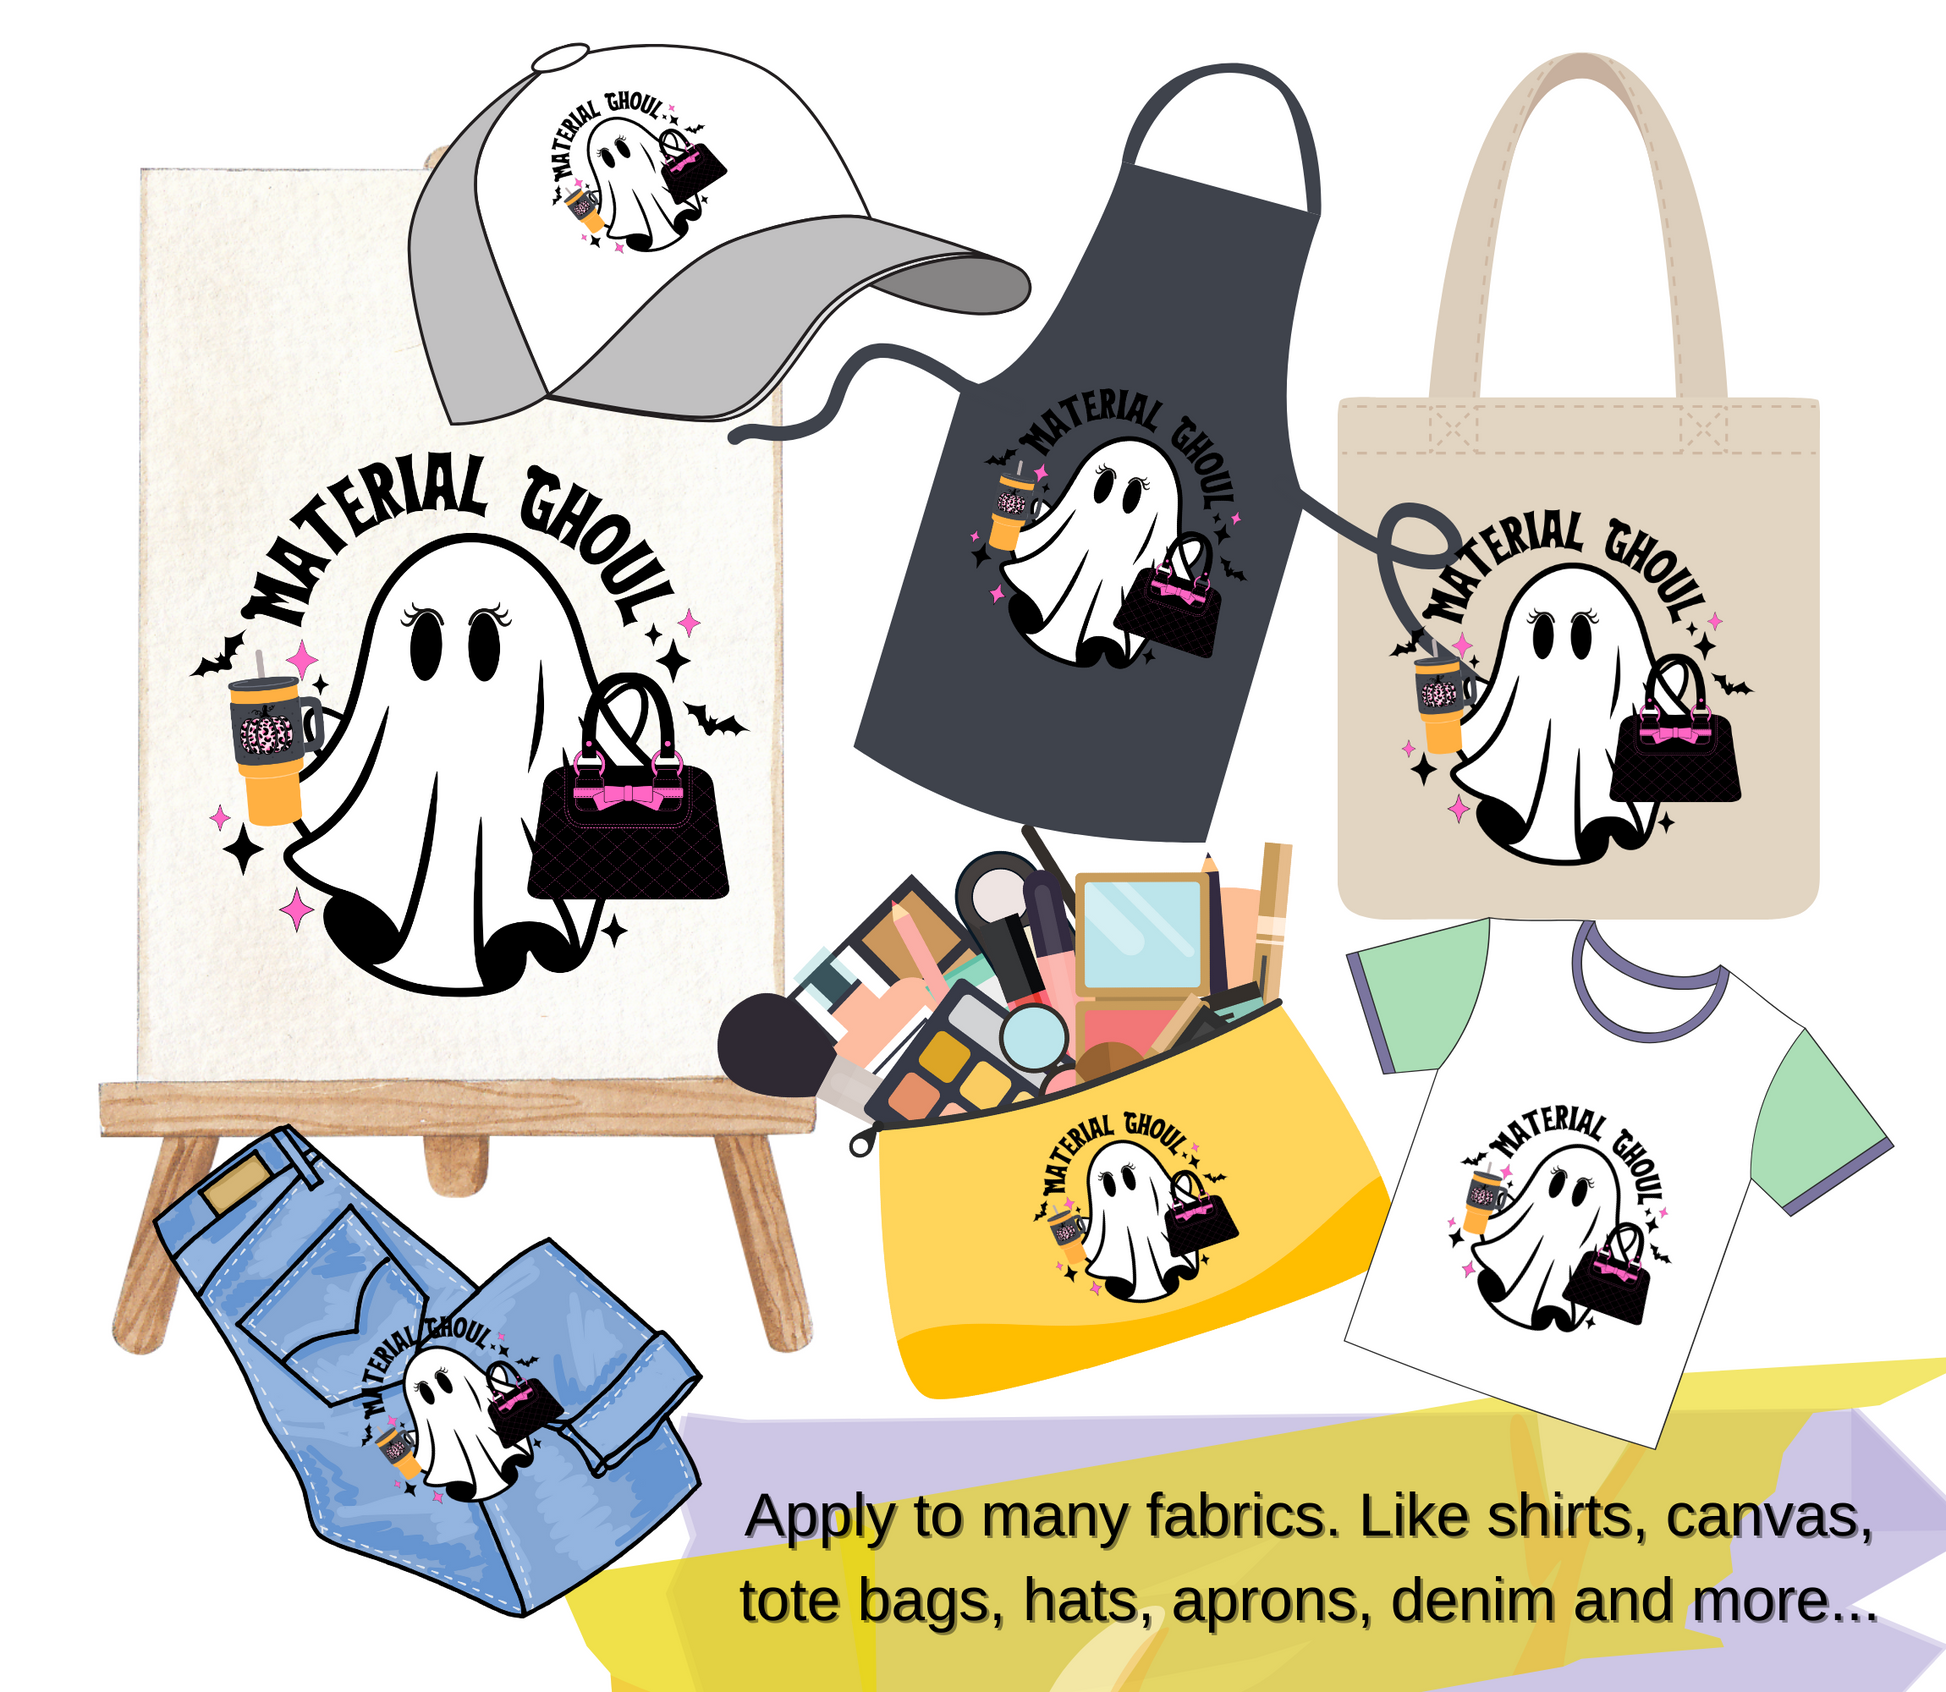 Retro ghost DTF design applied on apron, canvas art, jeans, cap, t-shirt, and makeup bag